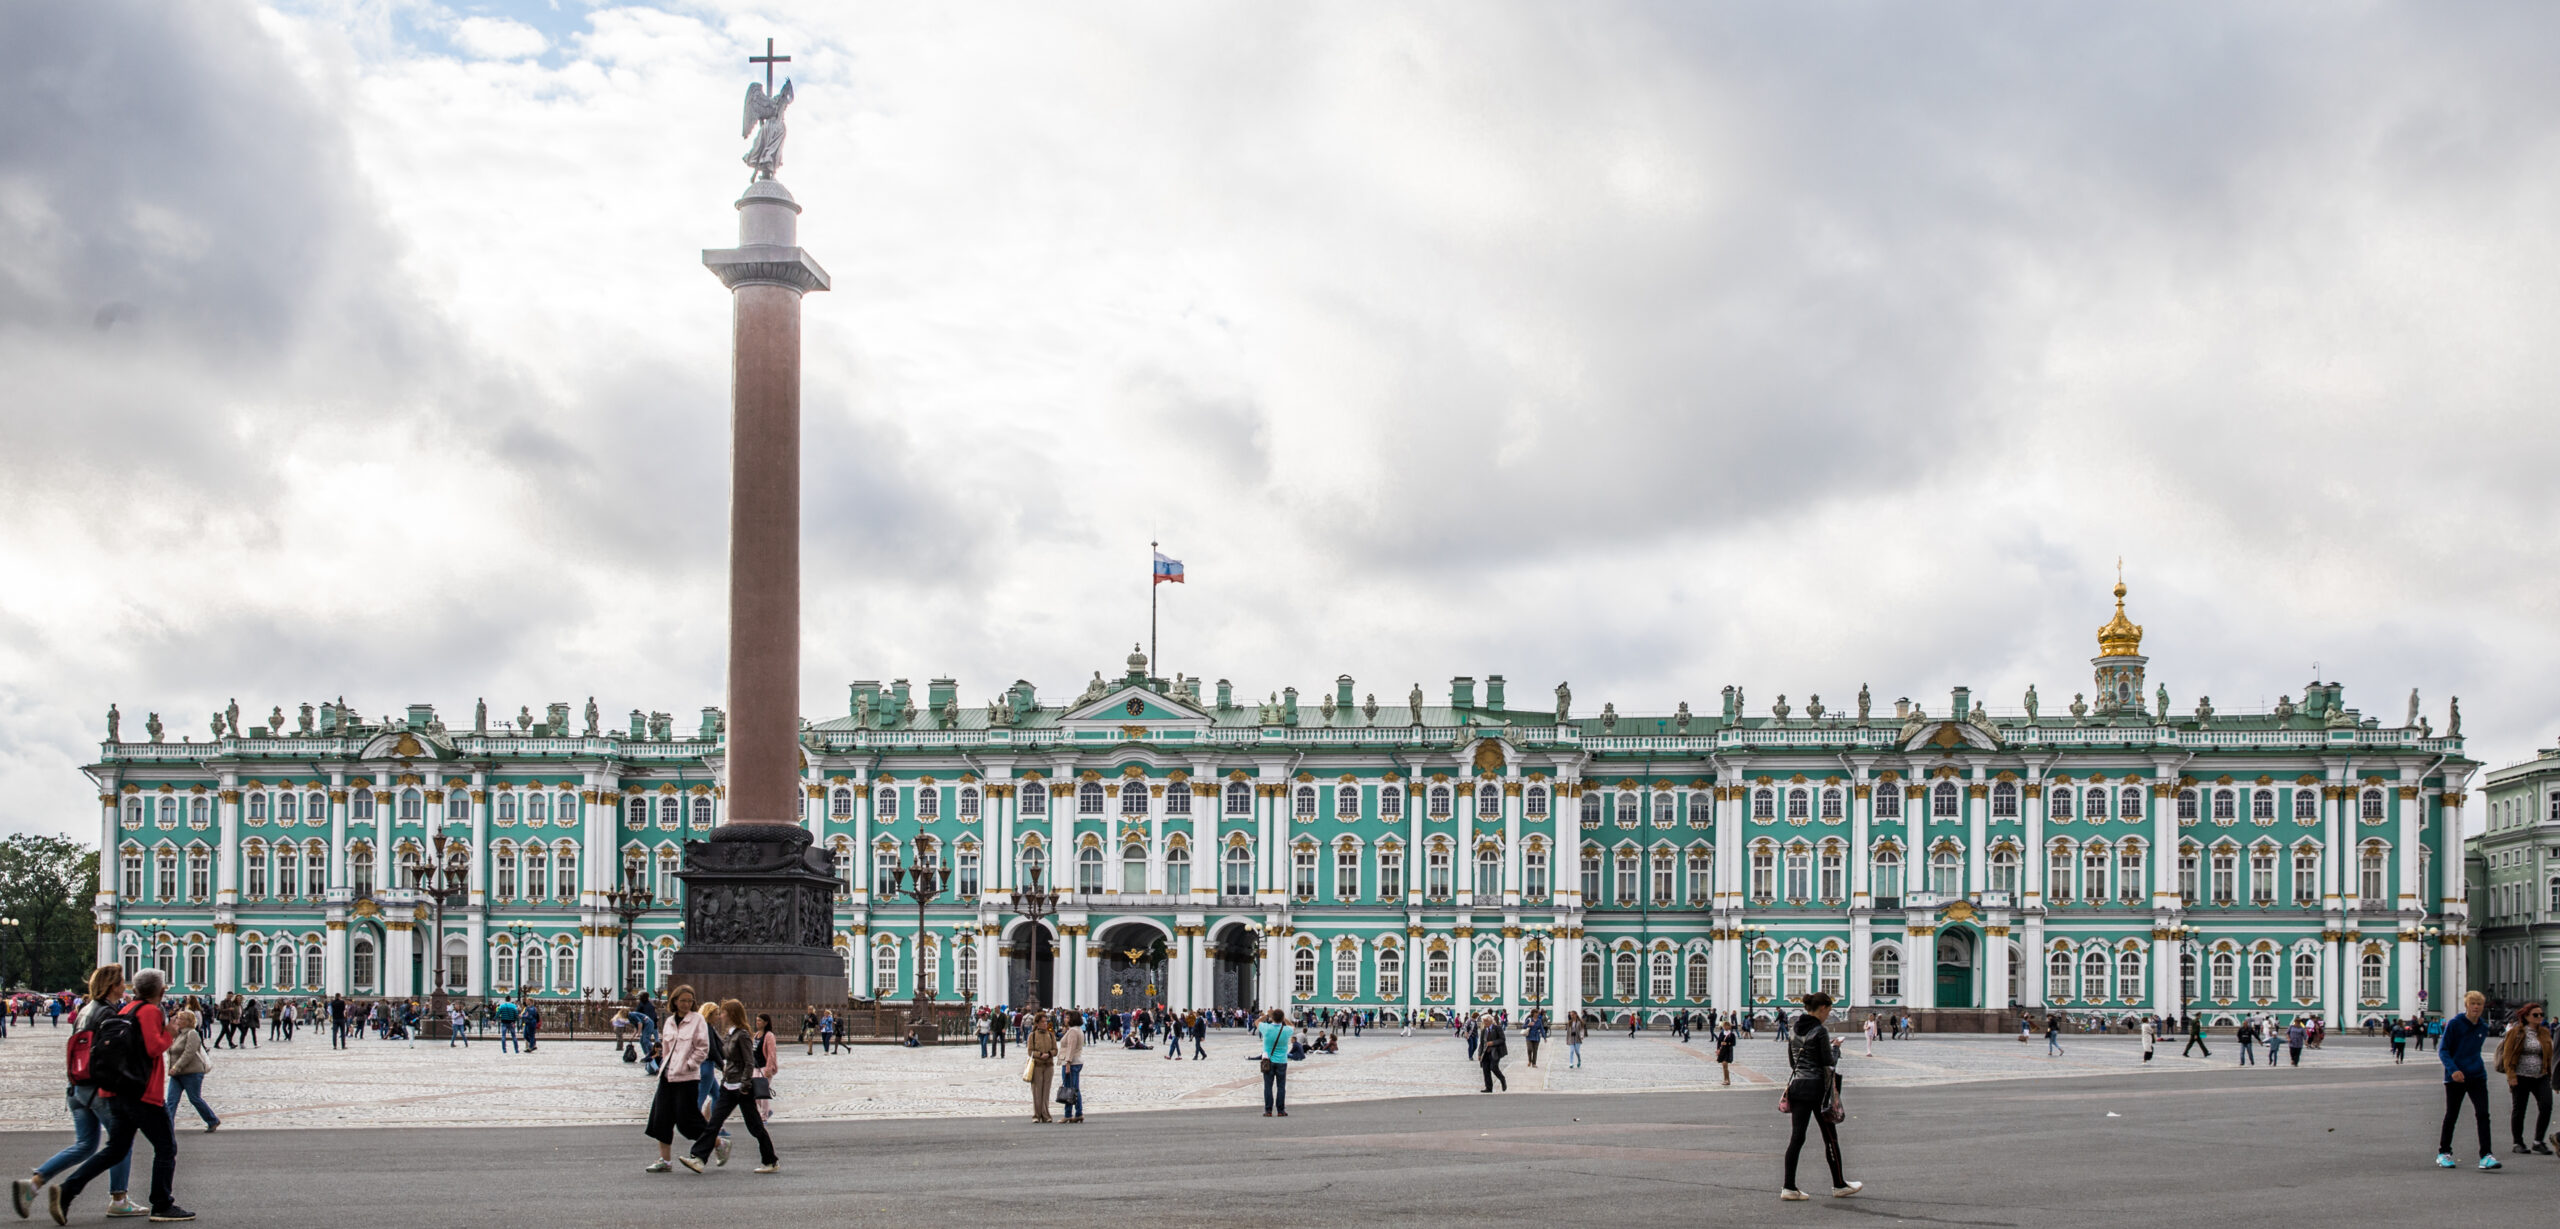 The Hermitage (viewed from Palace Square), St Petersberg